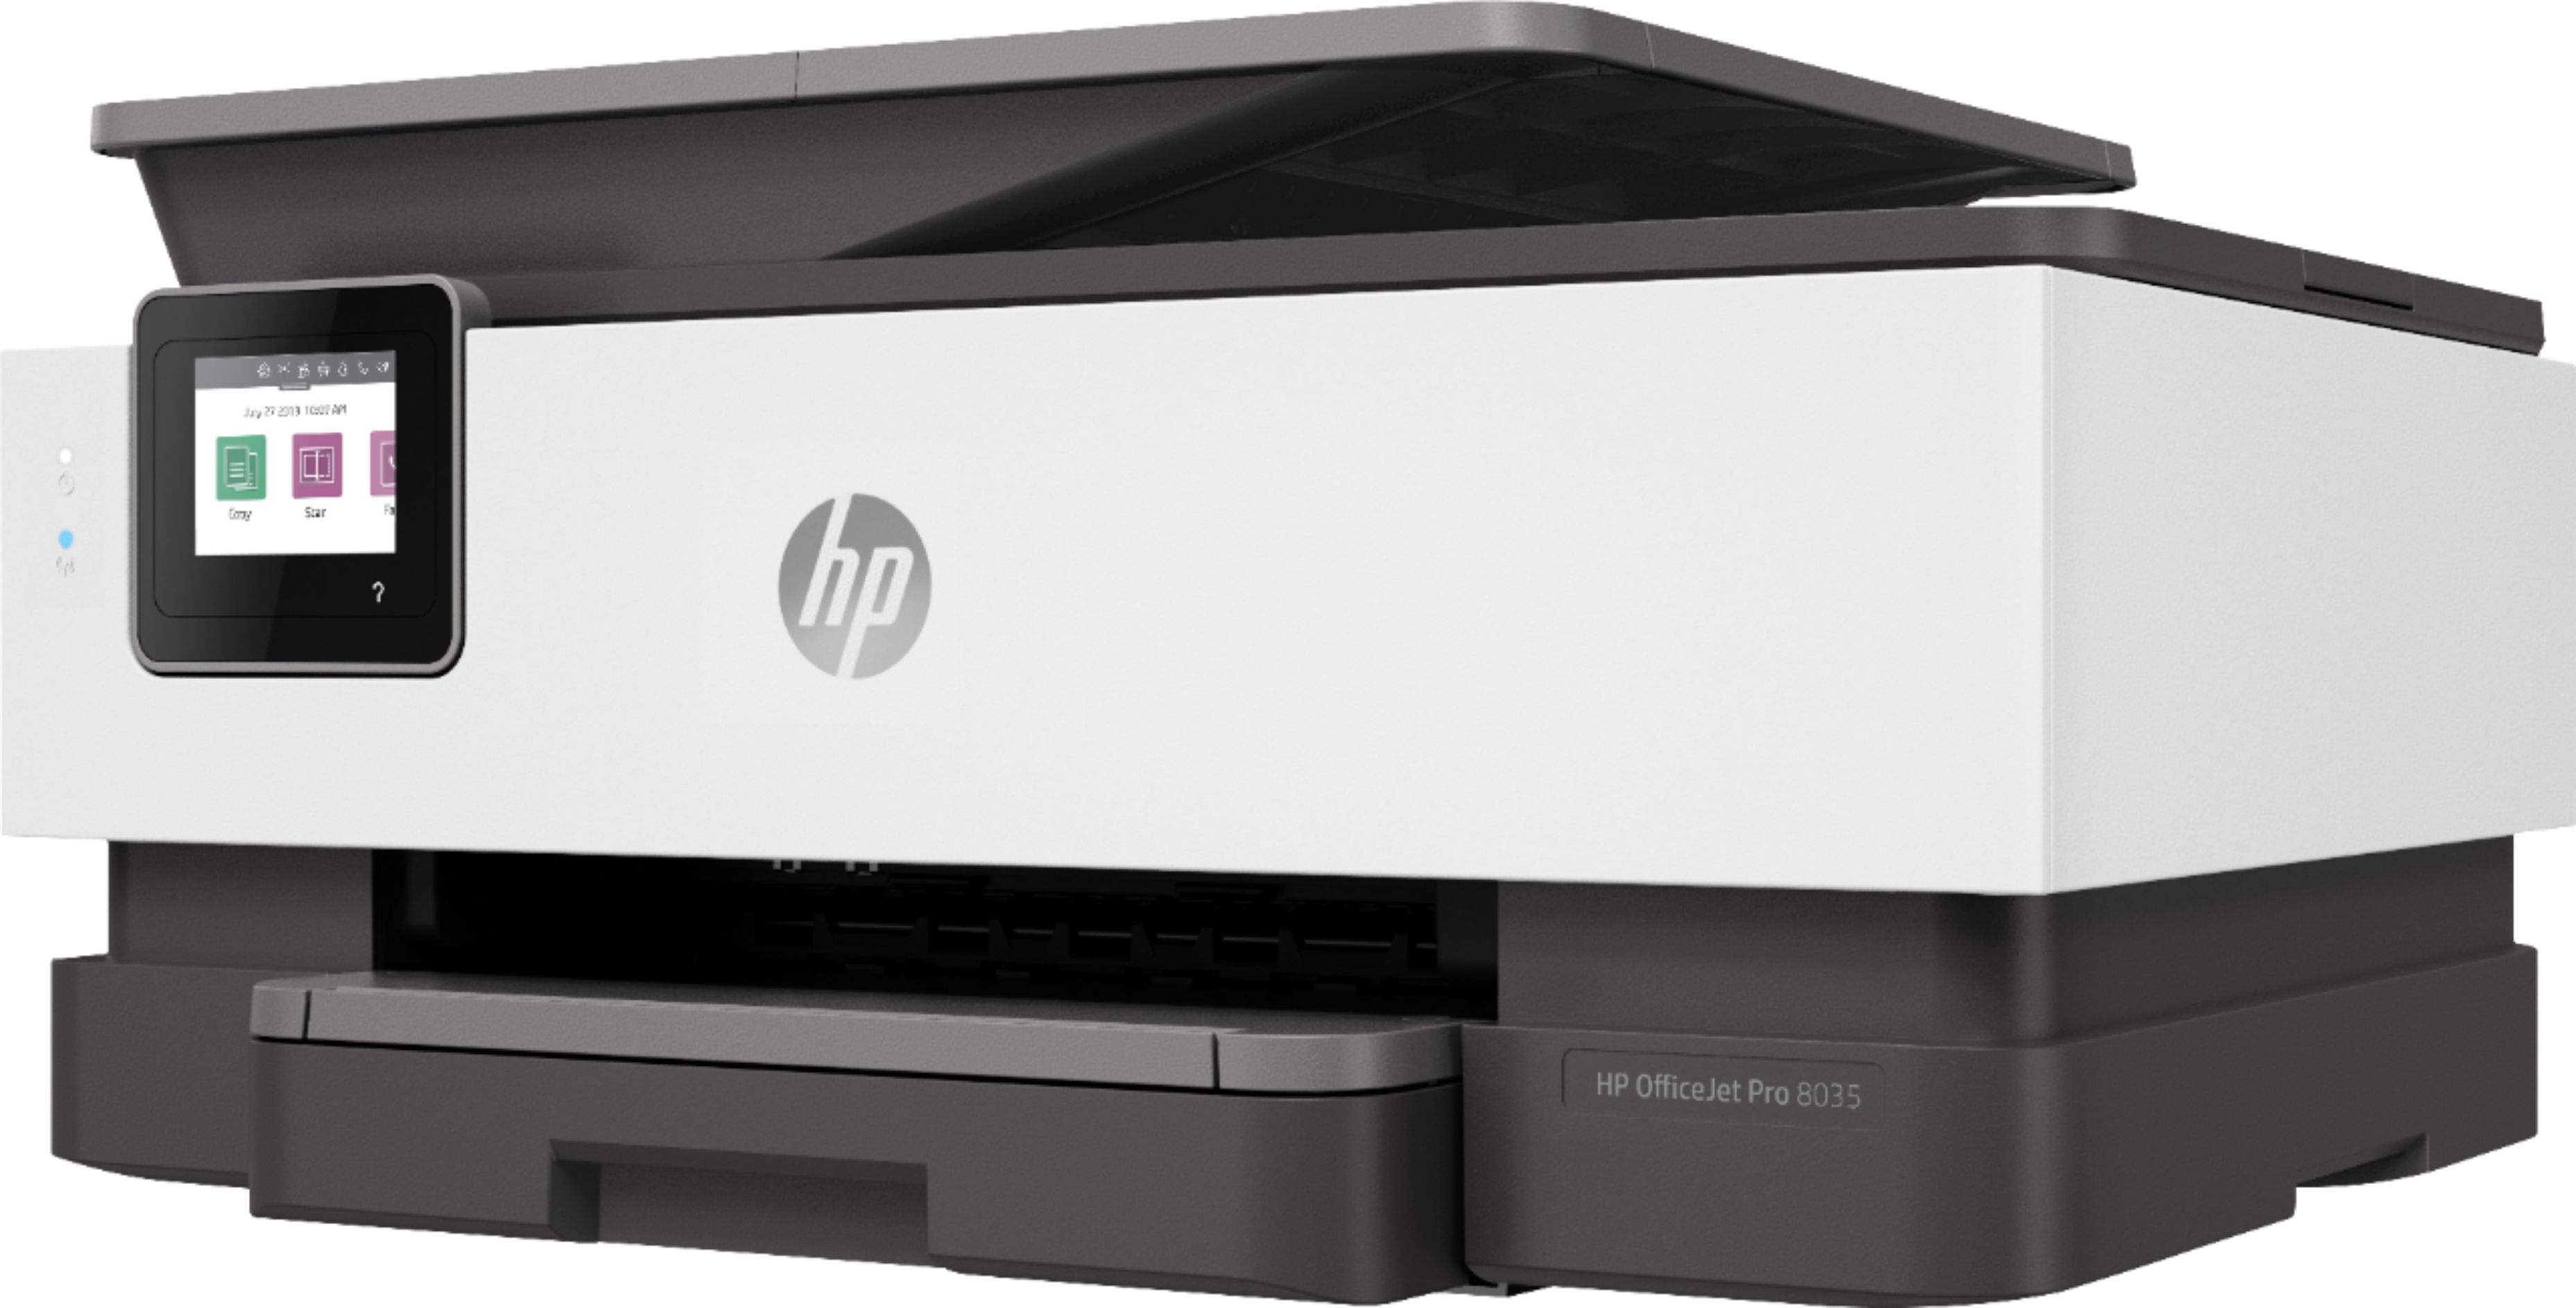 User manual HP OfficeJet Pro 8022e (English - 205 pages)